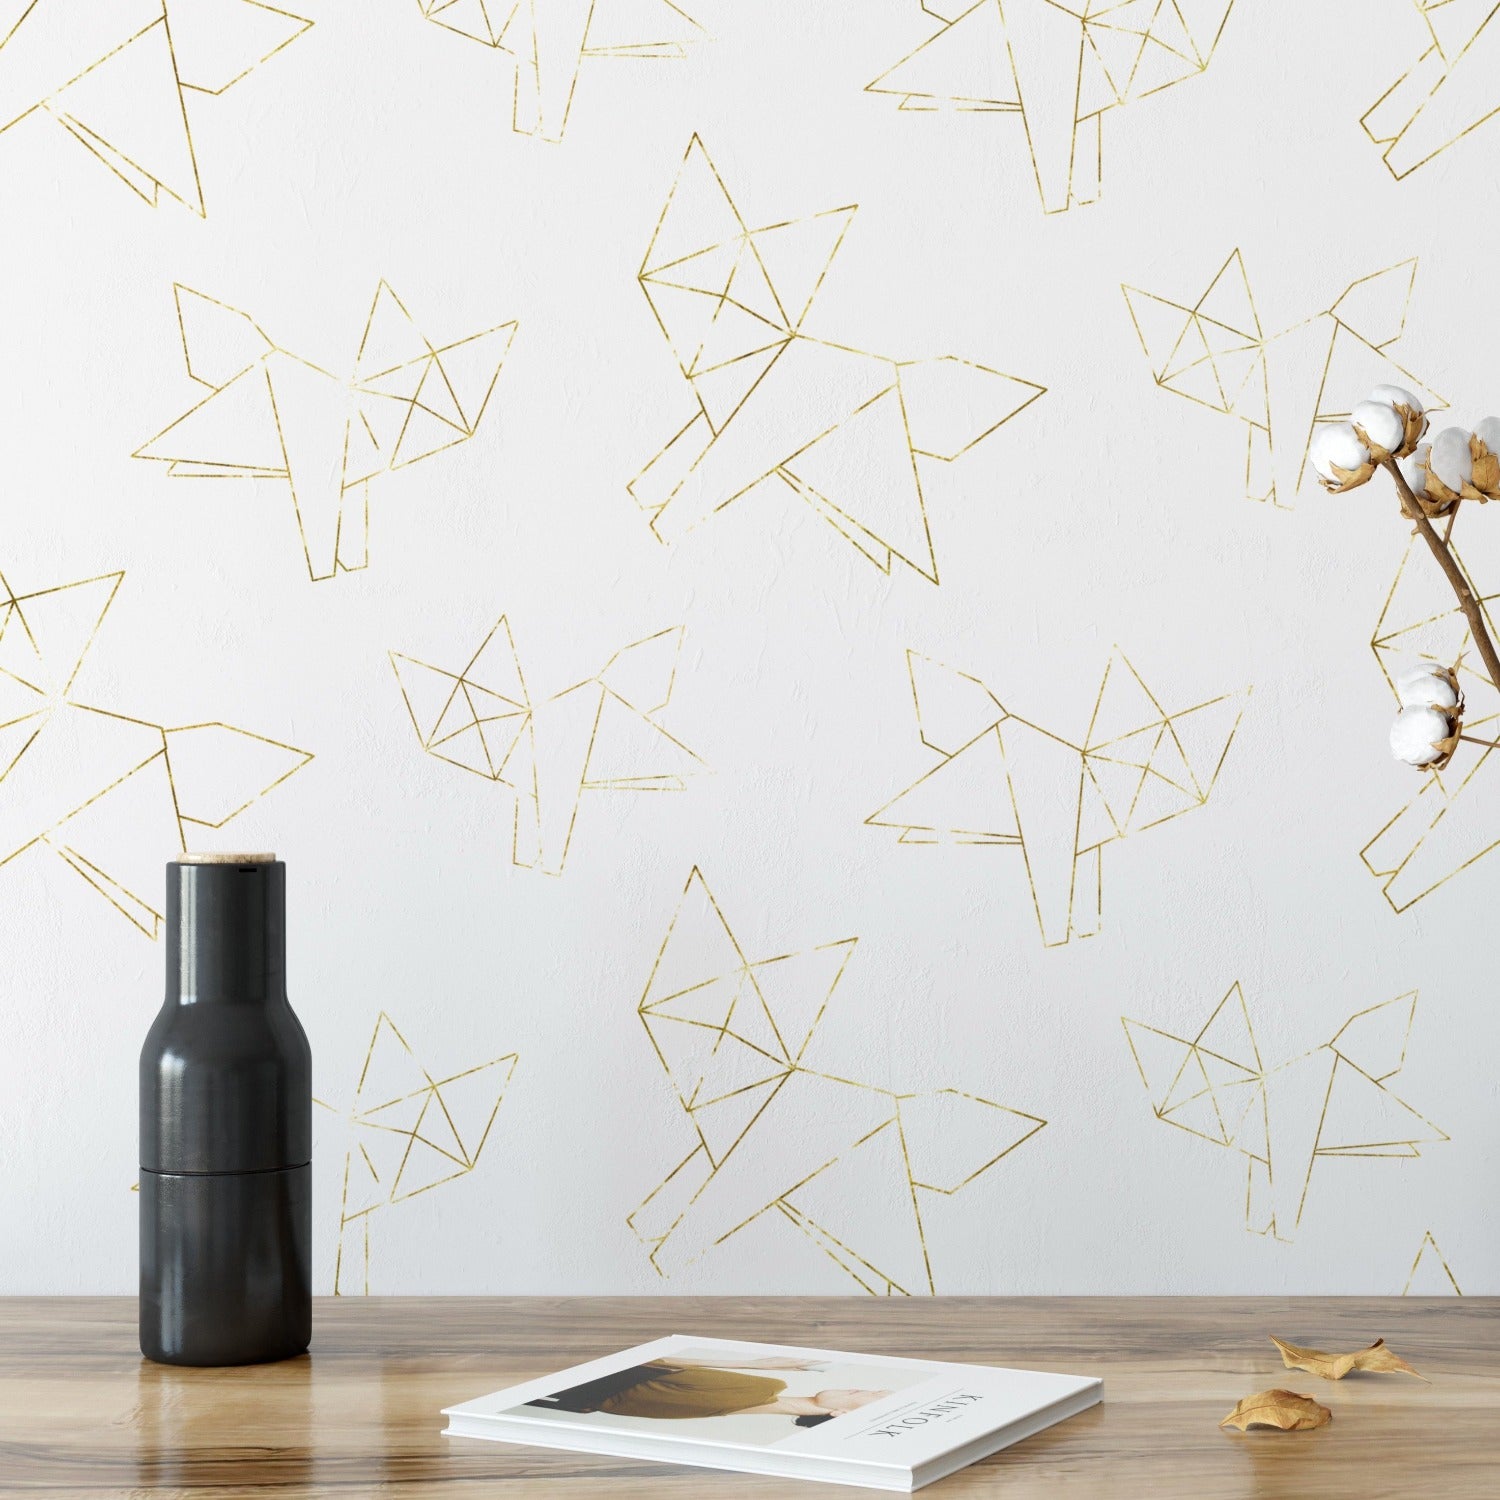 Stylish room with Gold Origami Wallpaper - Gold Fox pattern. The wallpaper showcases intricate gold foxes created from geometric lines, enhancing the room's contemporary aesthetic.